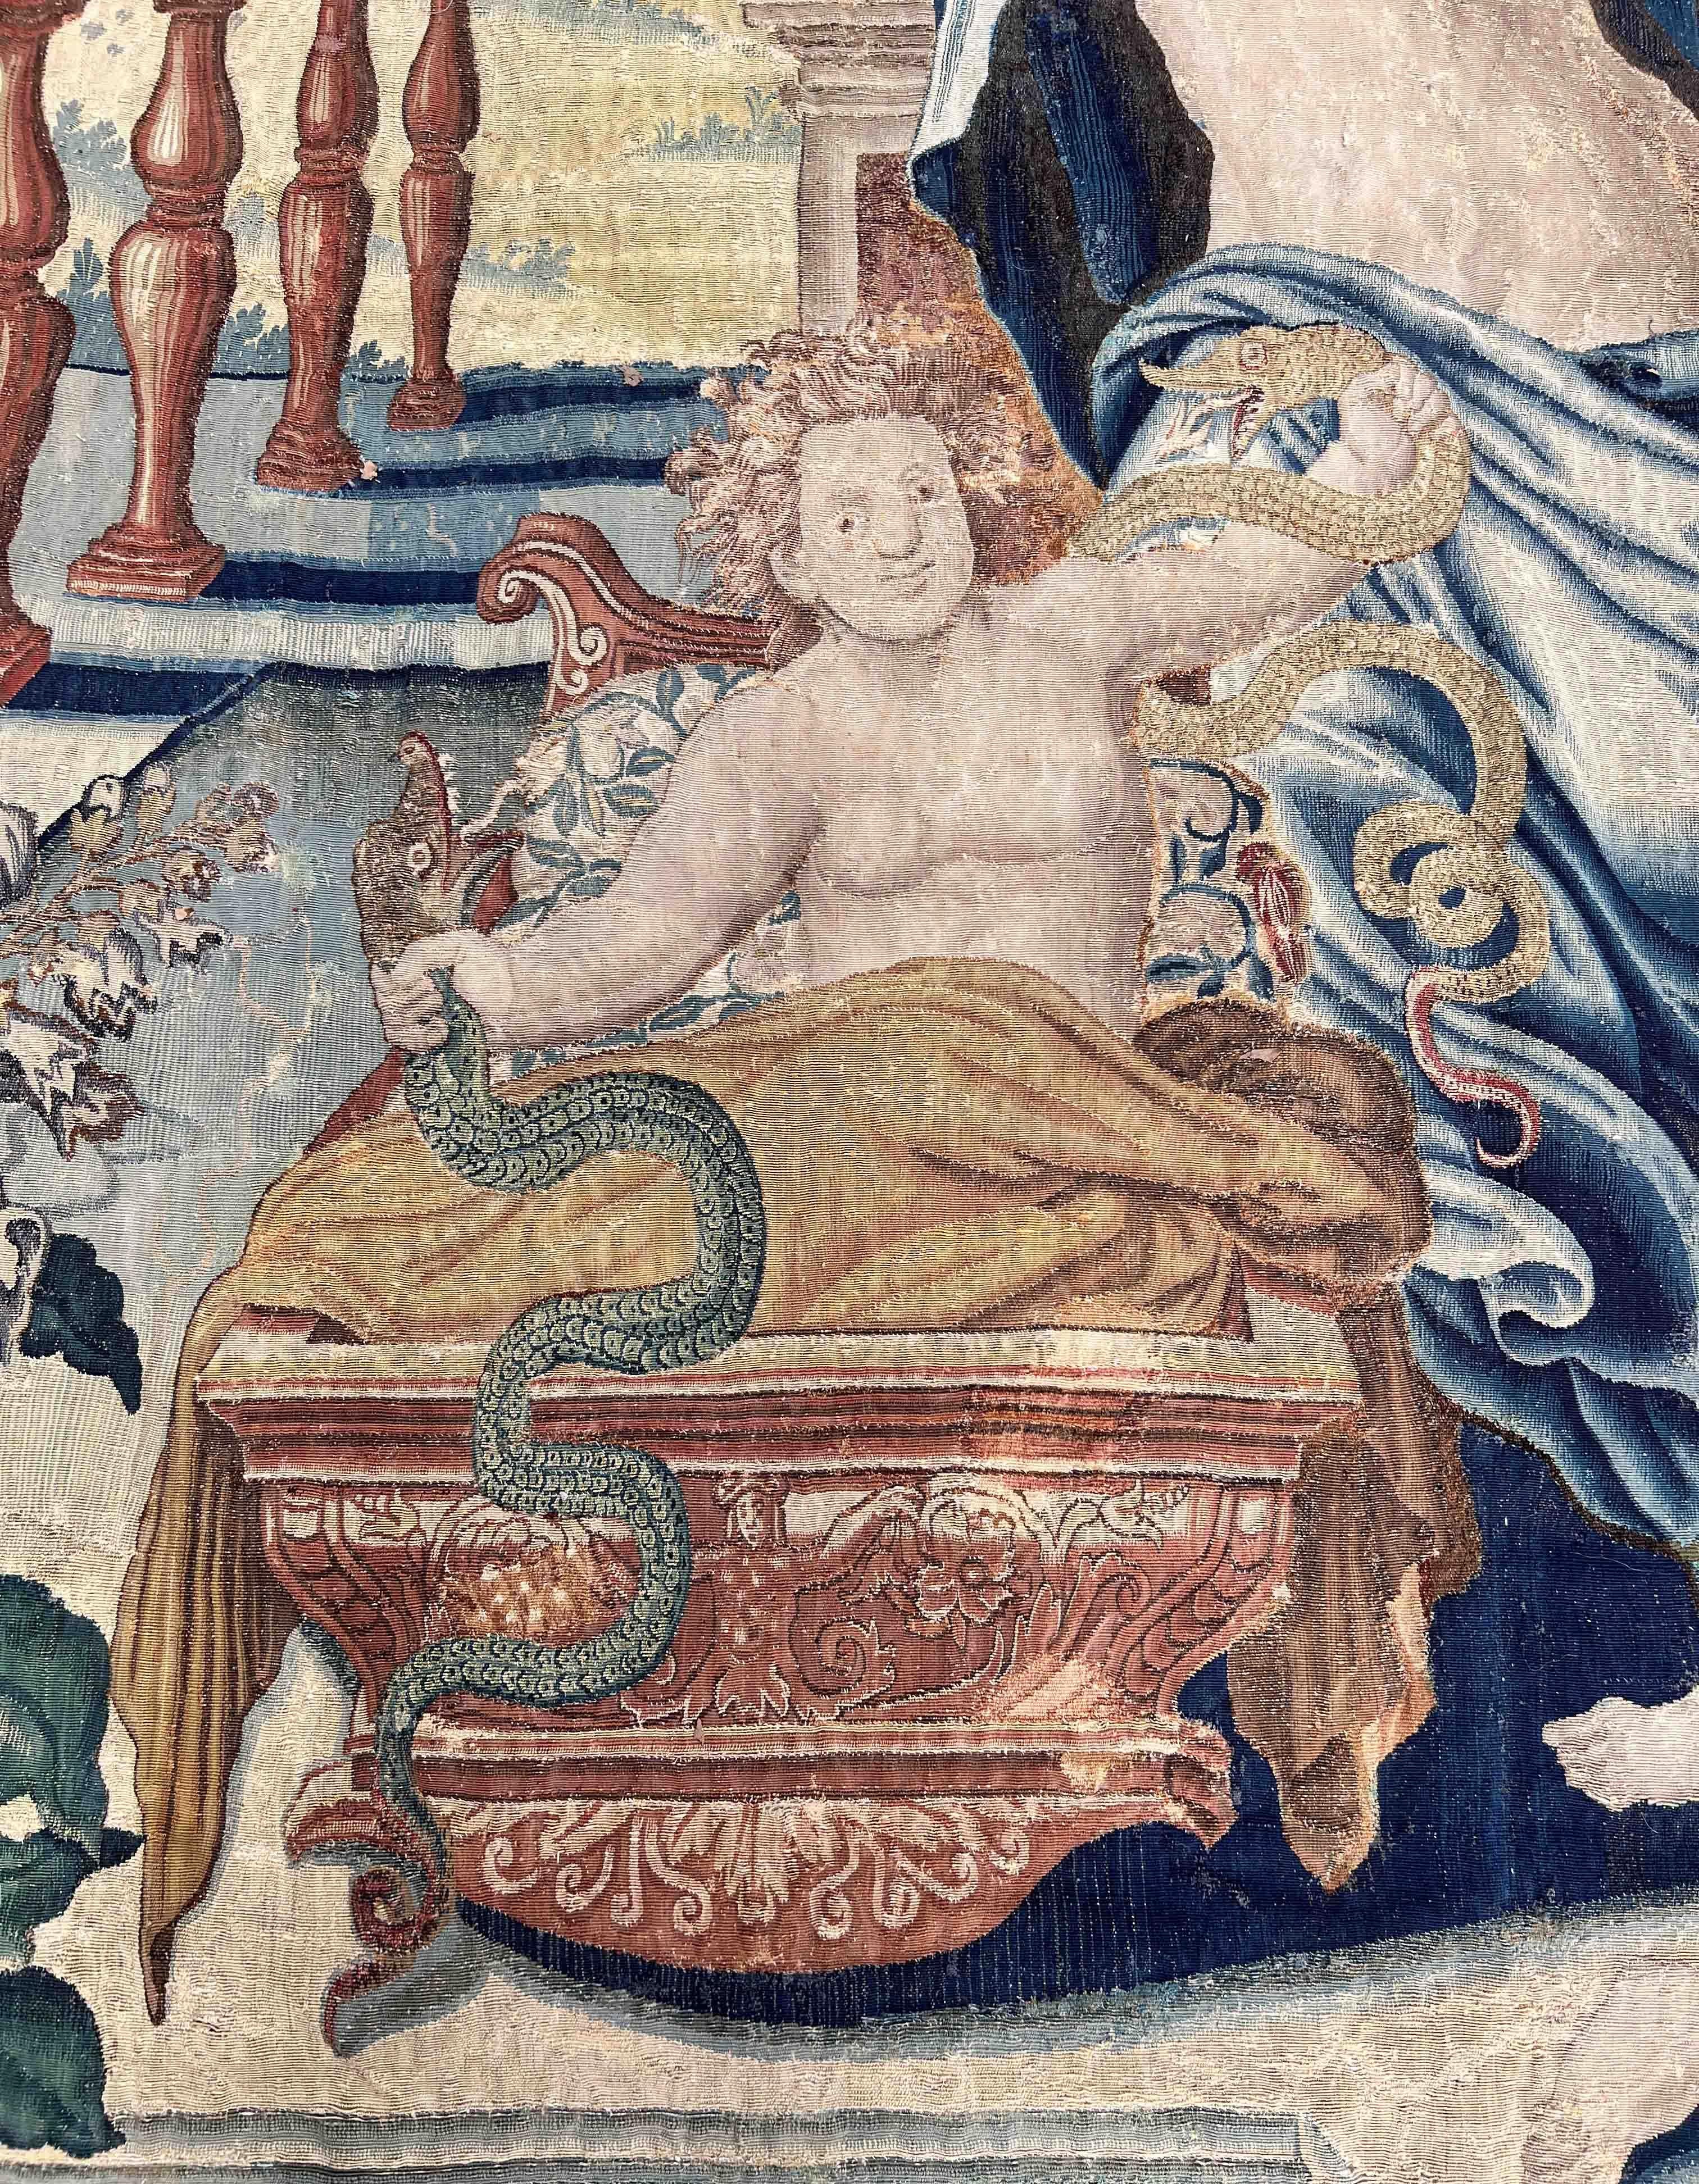 Sublime tapestry from the Gobelins factory dating from the 16th century,
Representation of the birth of Hercules, a famous character from Roman mythology. Hercules holds two snakes in his hands like toys. His parents are next to his cradle as well